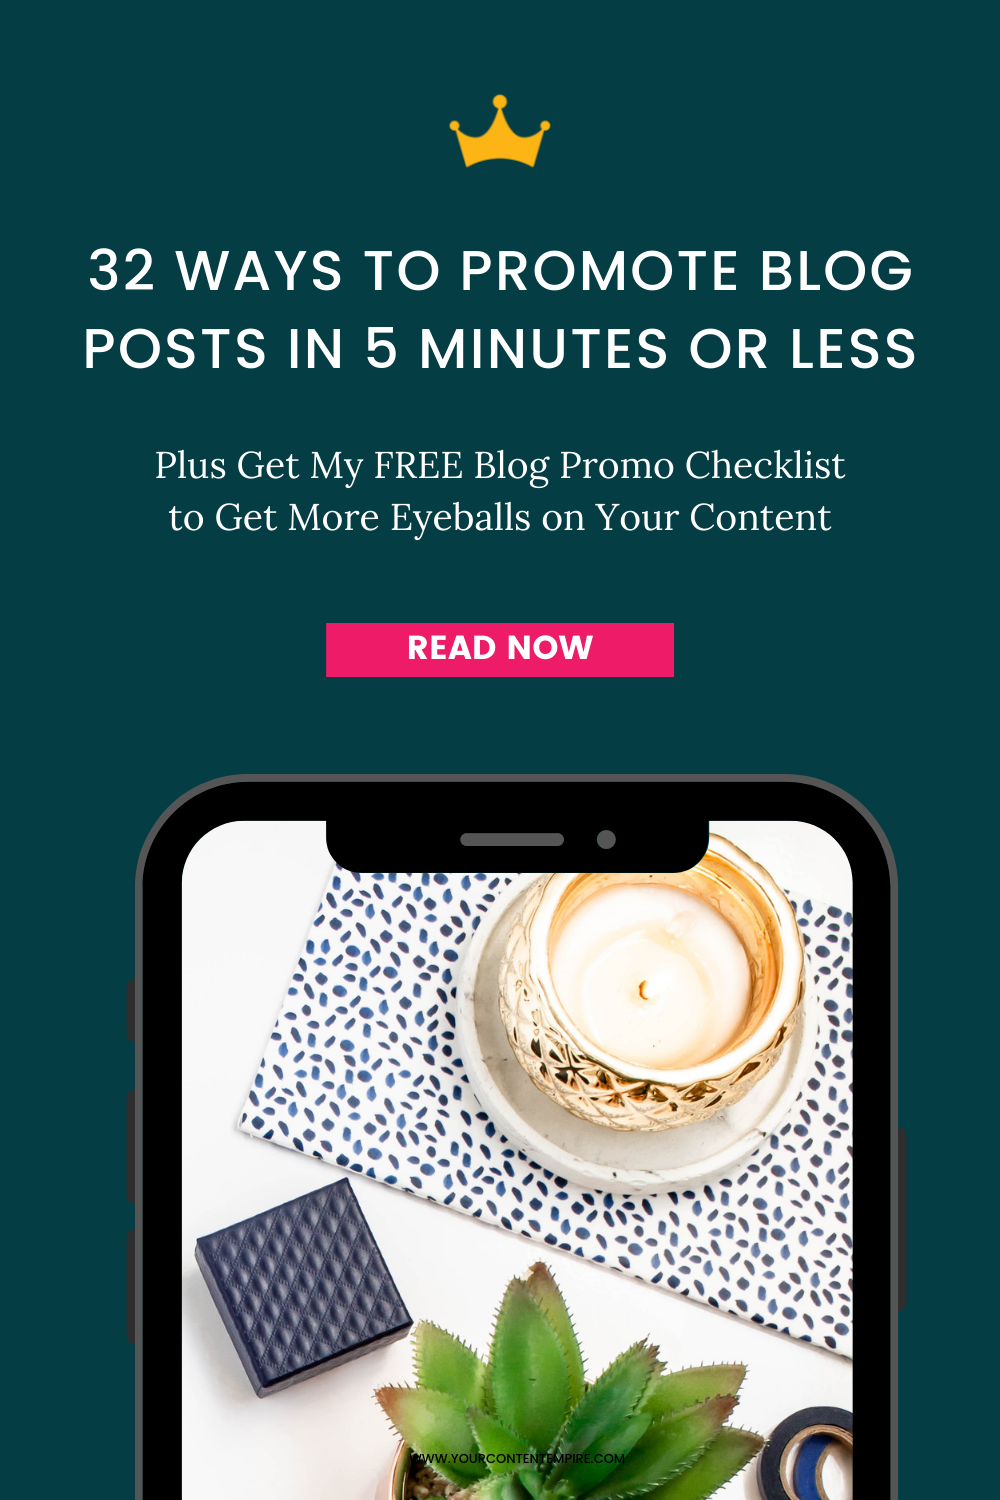 32 Ways to Promote Blog Posts in 5 Minutes or Less